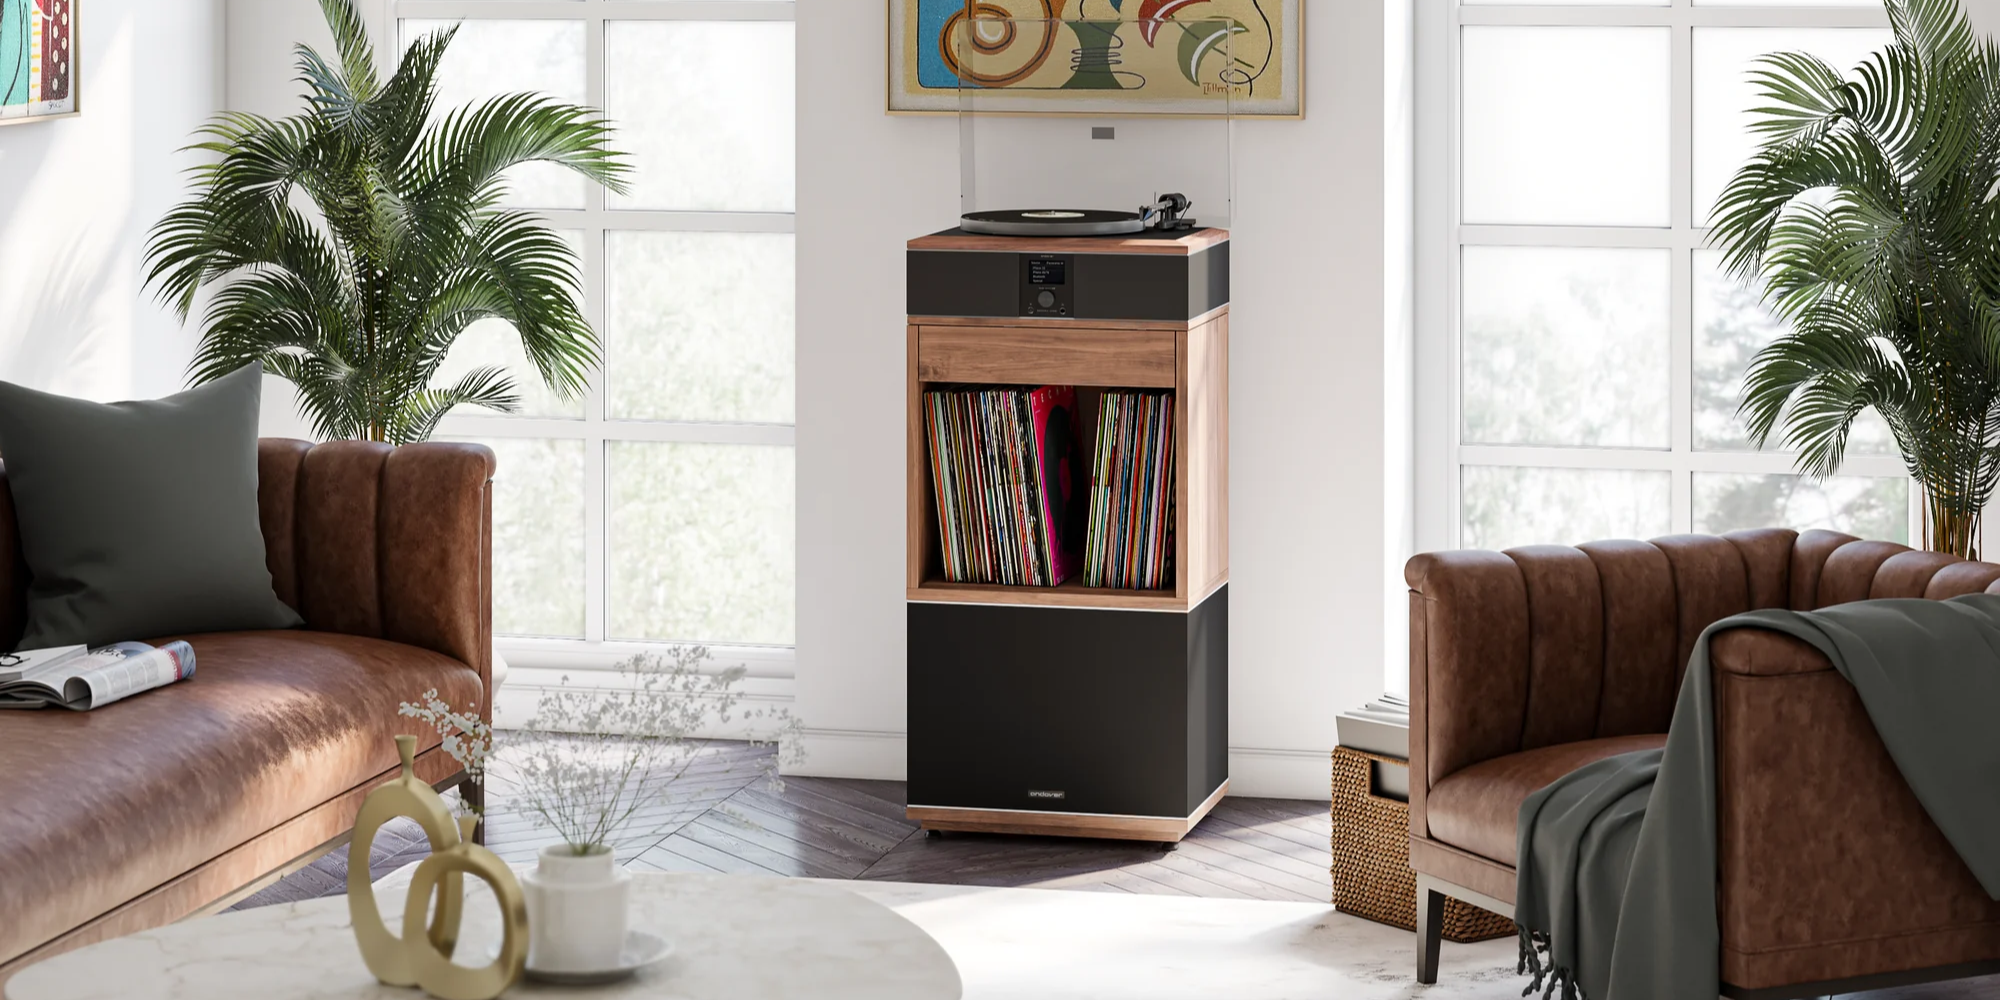 Full Record Players and Turntable Music Systems